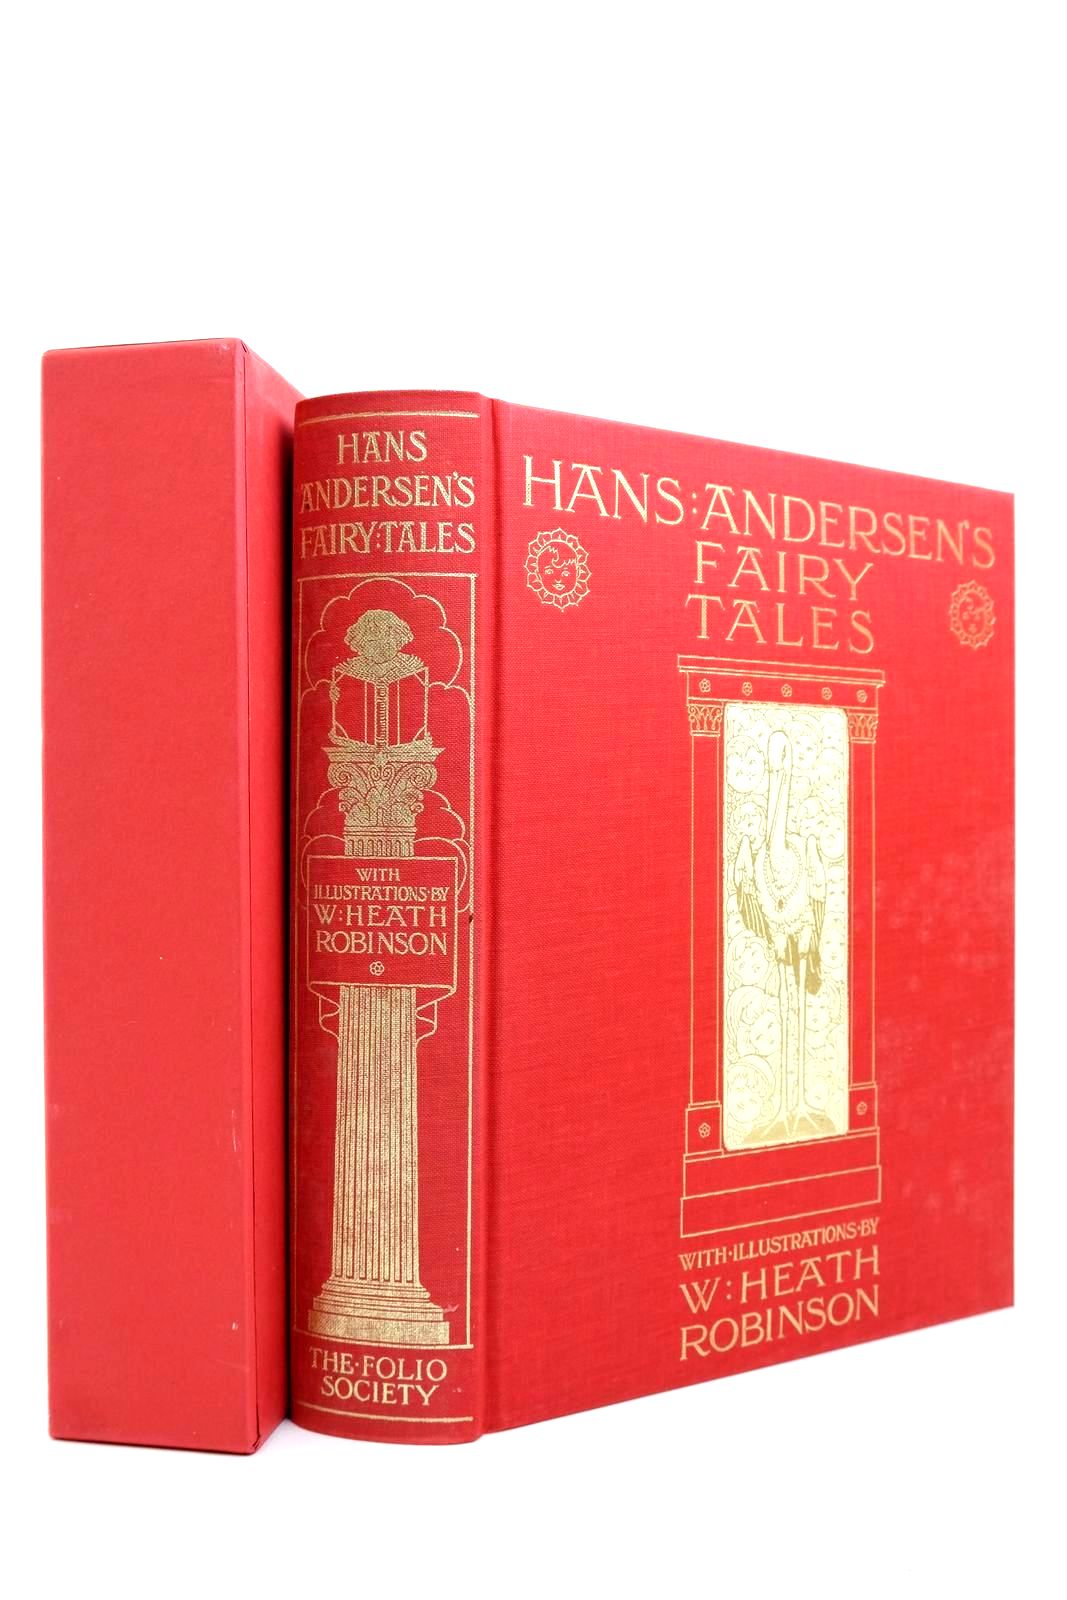 Photo of HANS ANDERSEN'S FAIRY TALES written by Andersen, Hans Christian illustrated by Robinson, W. Heath published by Folio Society (STOCK CODE: 2140876)  for sale by Stella & Rose's Books